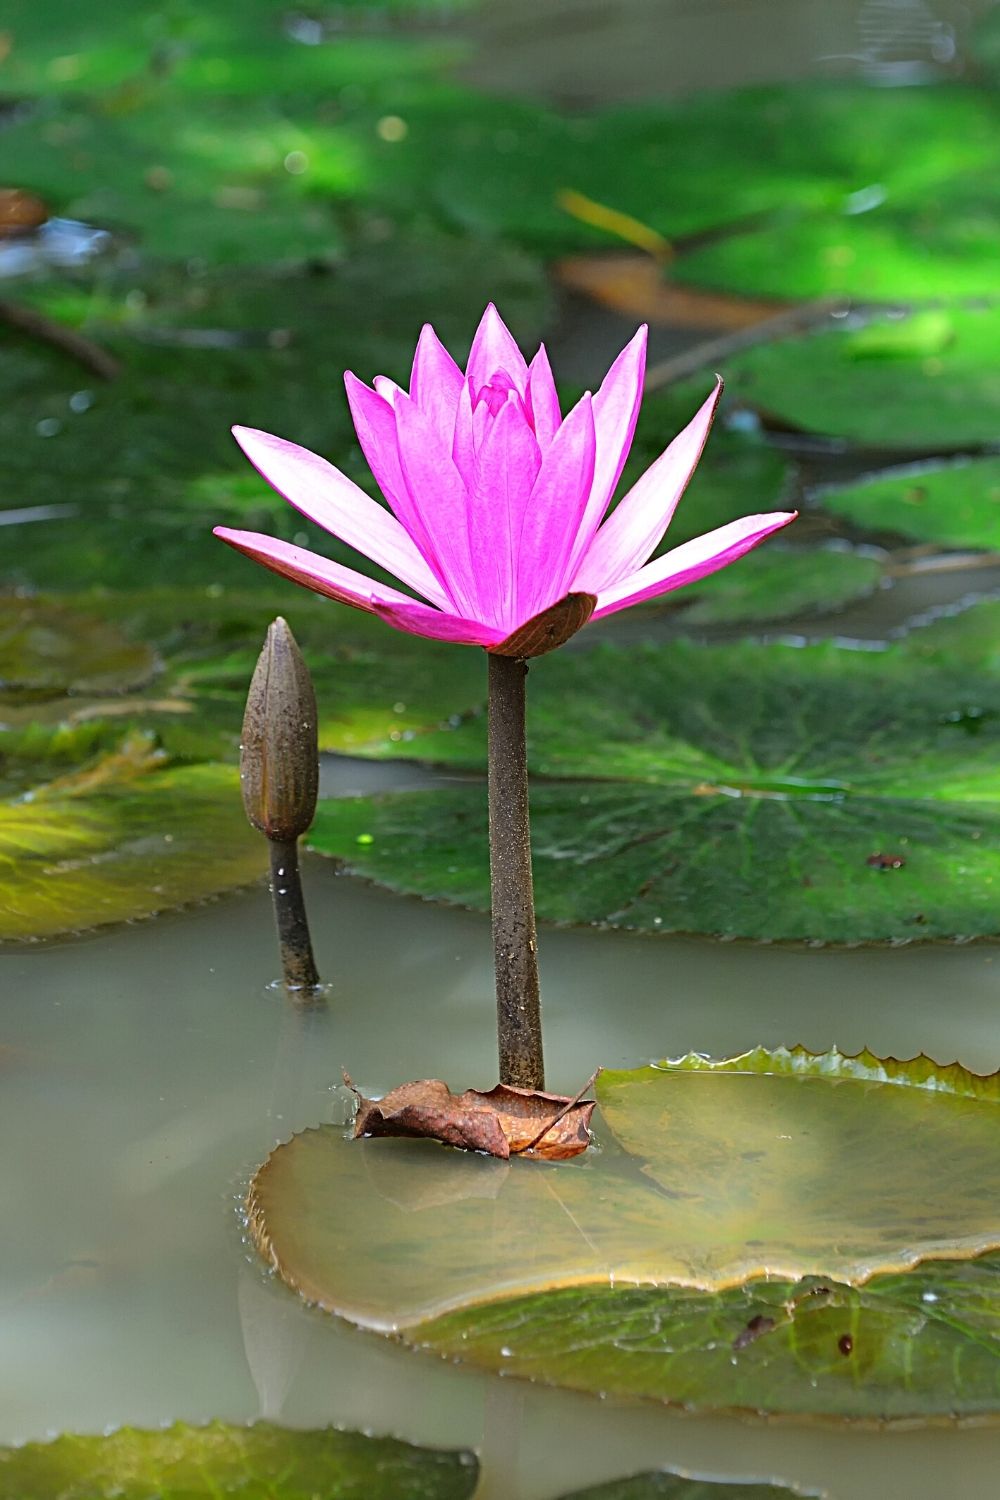 Tiger Lotus is another great aquatic plant to grow for your betta fish as they're colorful